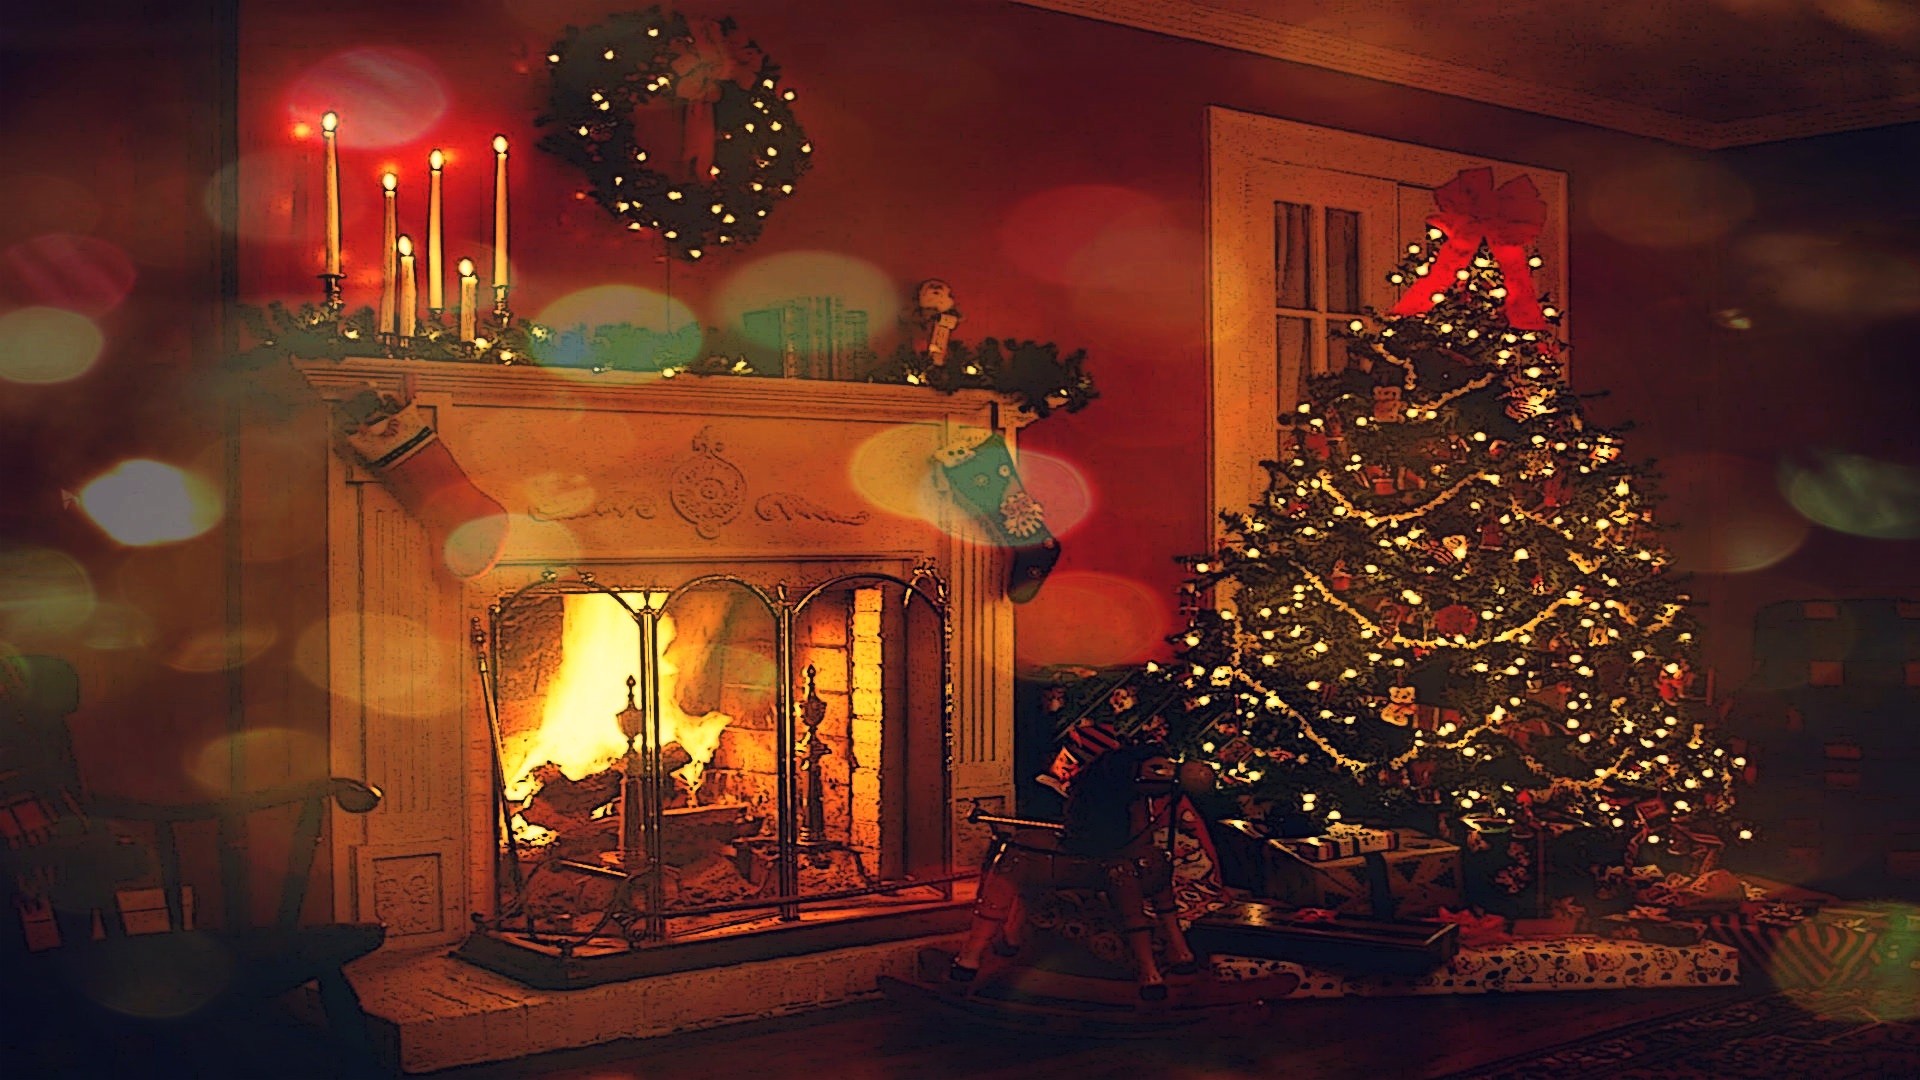 General 1920x1080 atmosphere lights fireplace decorations Christmas Christmas tree